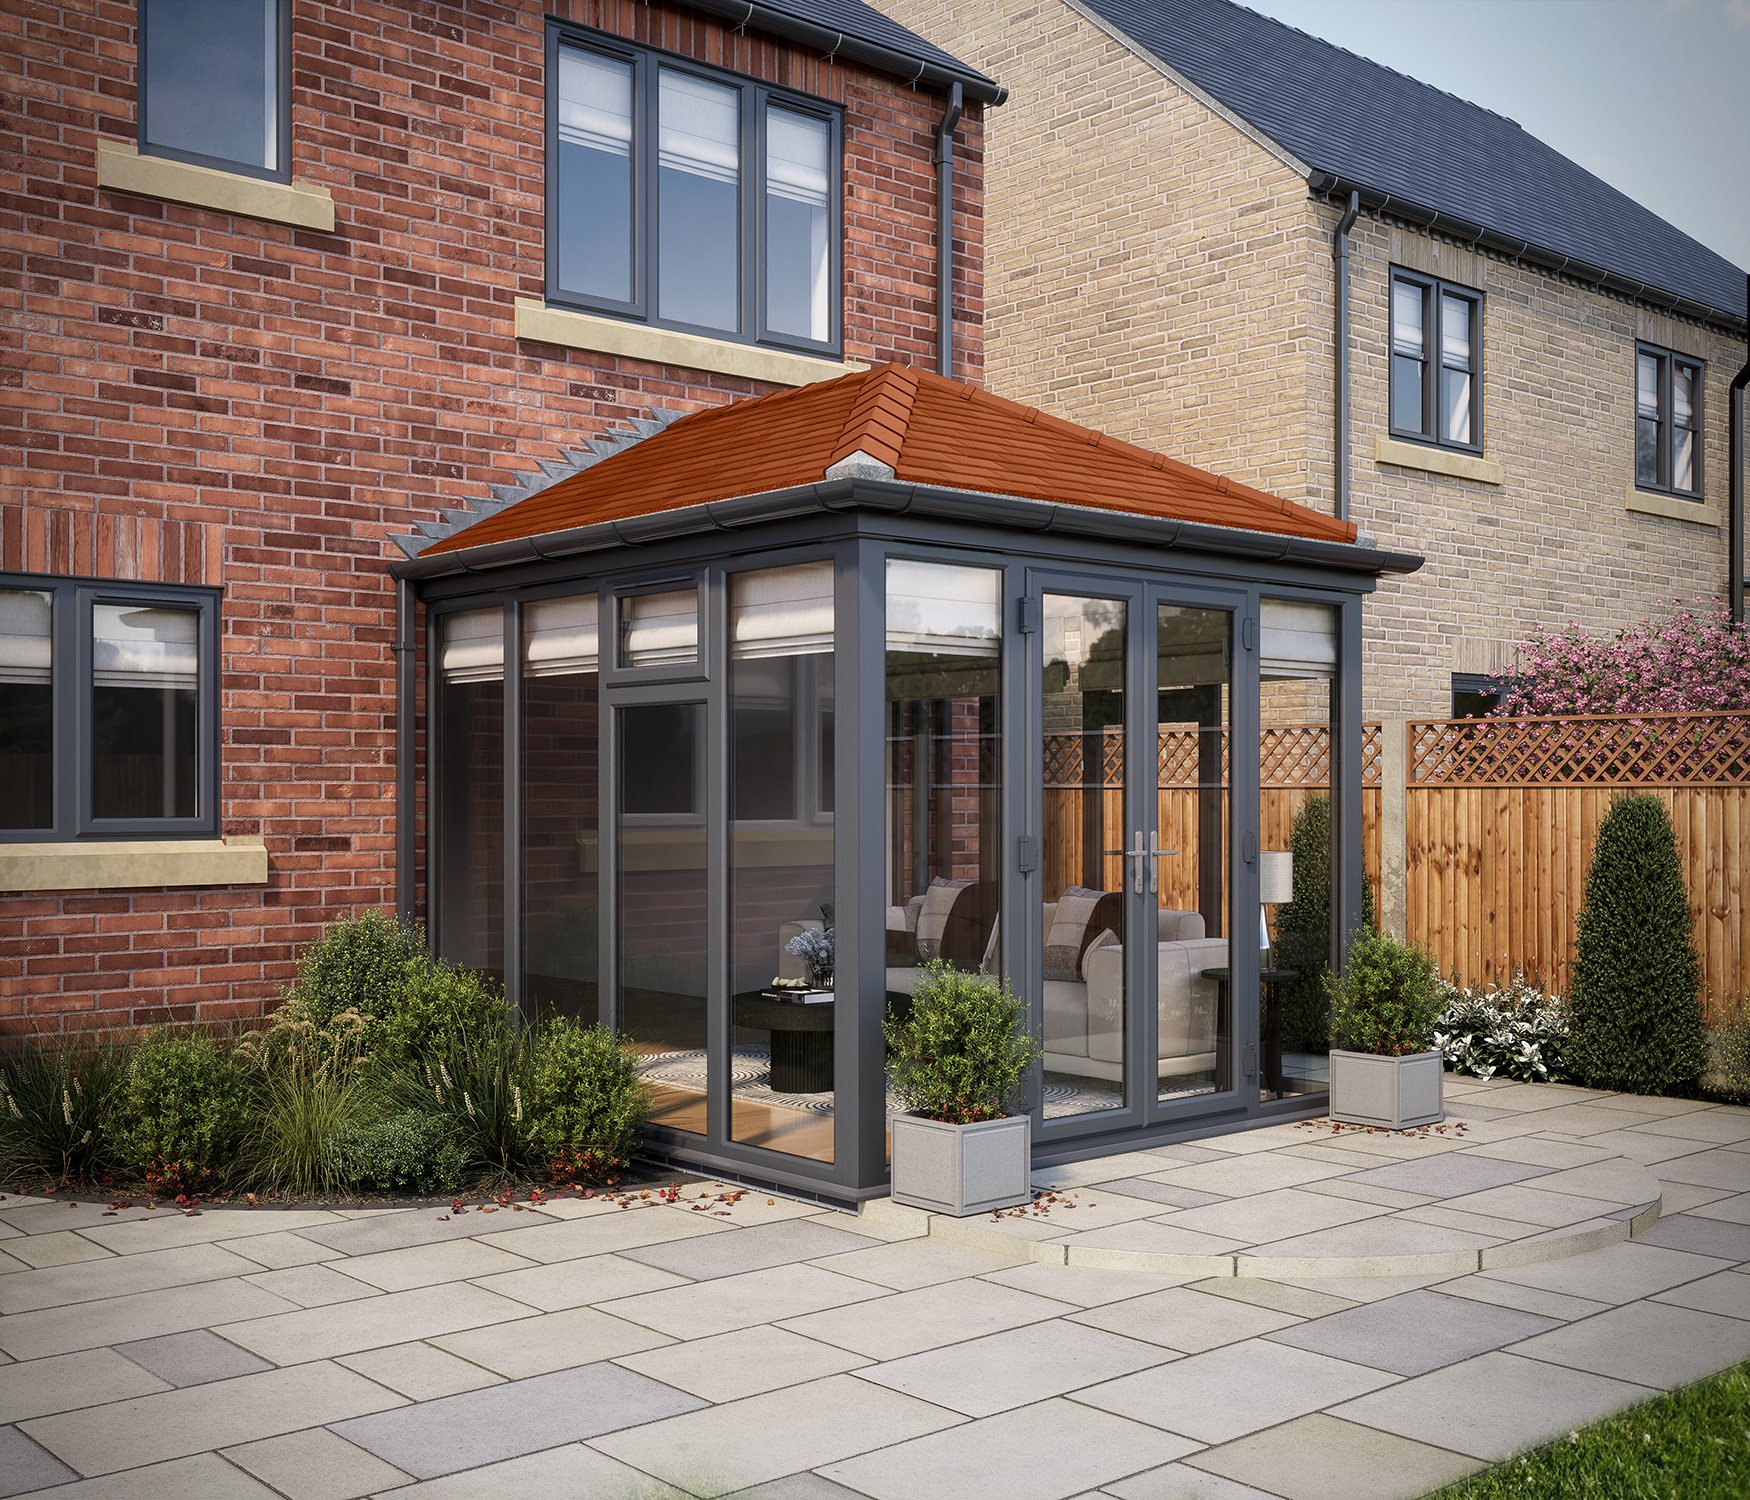 Image of SOLid Roof Full Height Edwardian Conservatory Grey Frames with Rustic Terracotta Tiles - 13 x 13ft